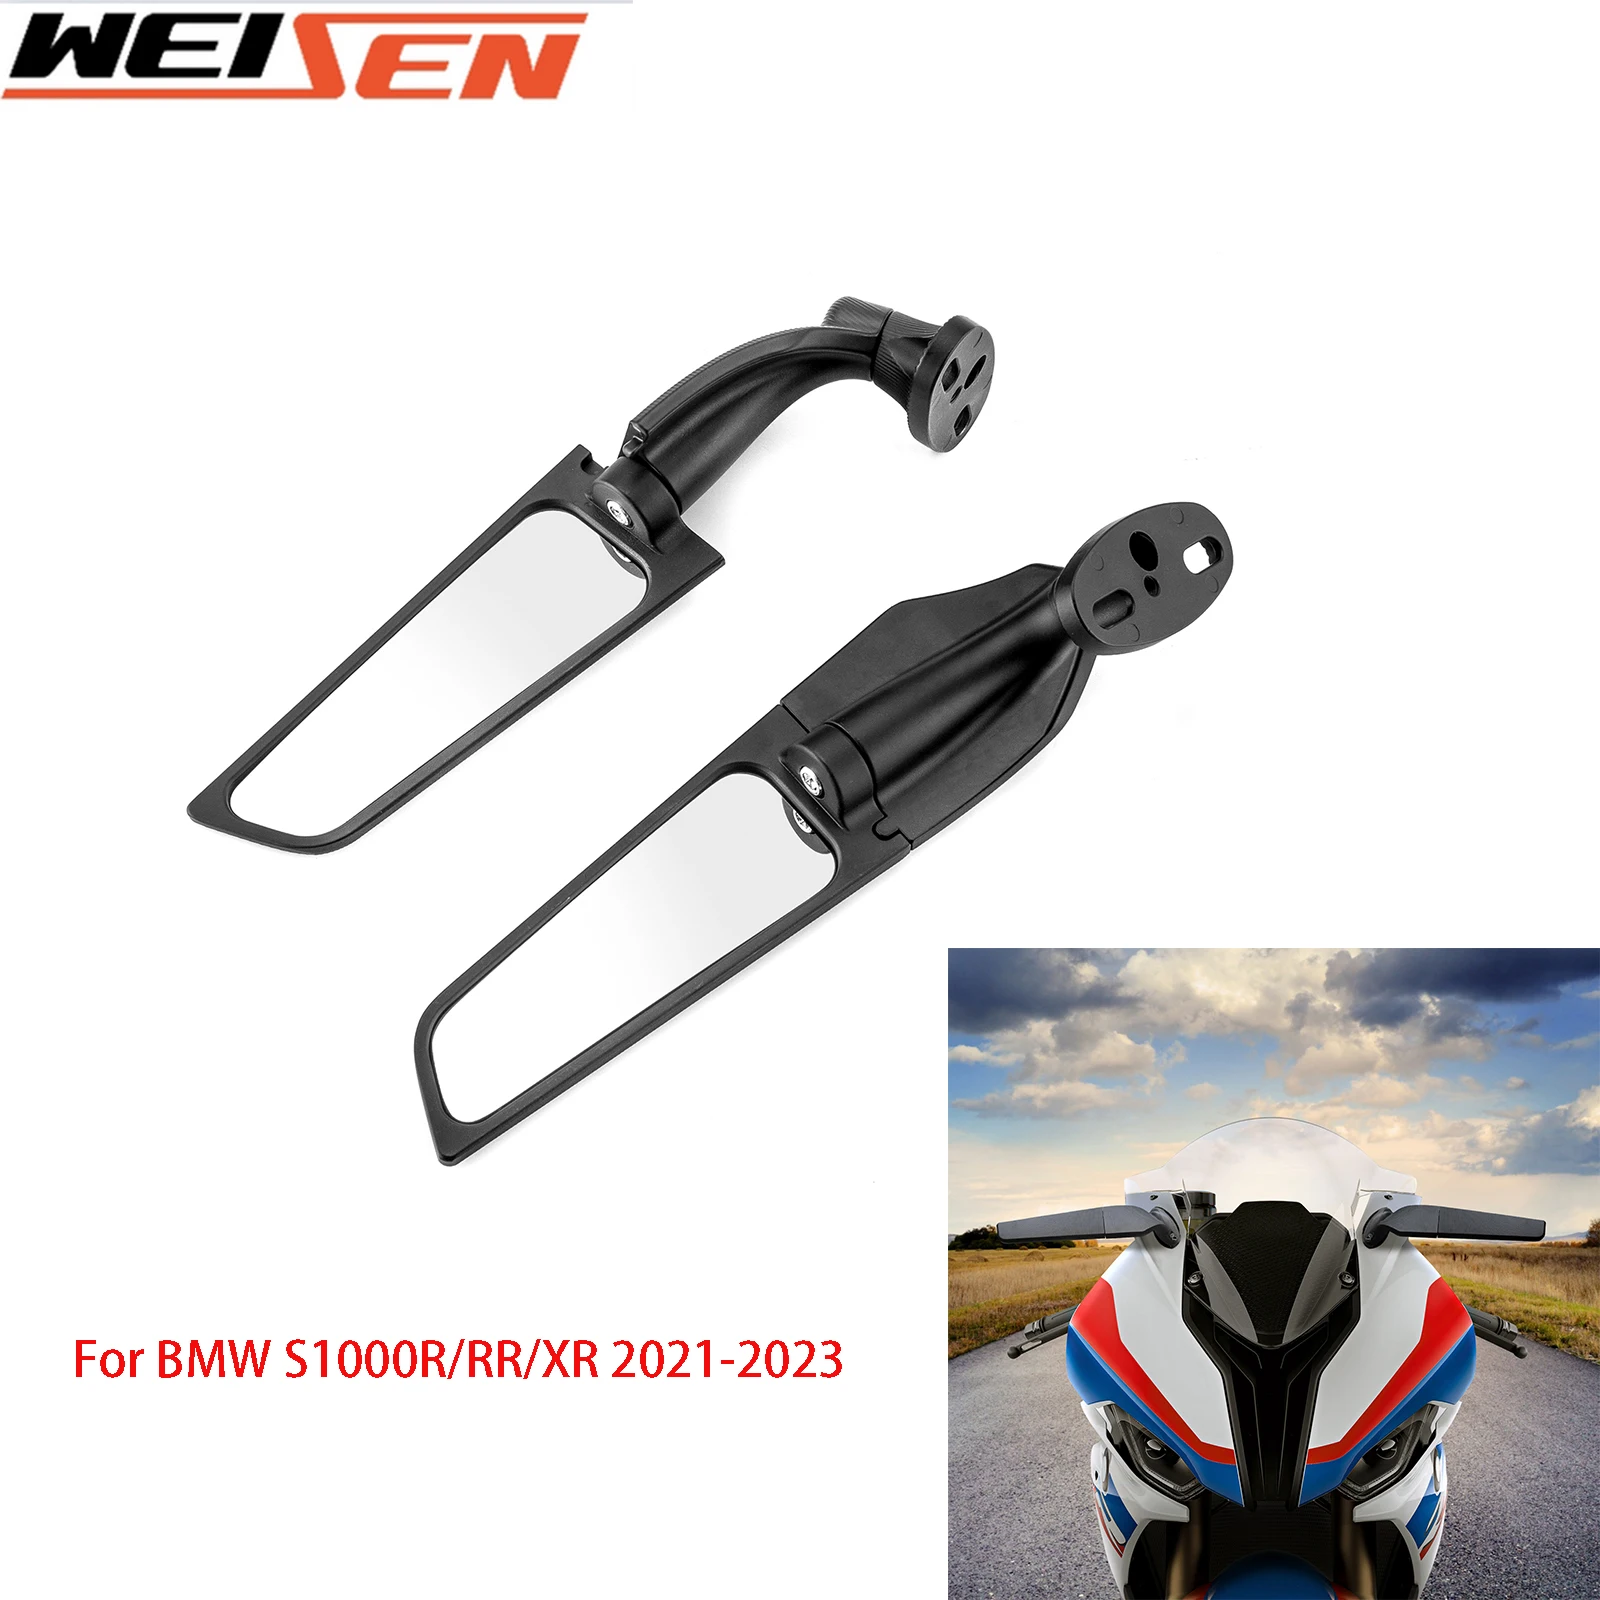 

For BMW S1000R/RR/XR 2021-2023 Motorcycle Bicycle Wind Wing Side Rearview Adjustable Rotating Mirror Handlebar Bike Accessories